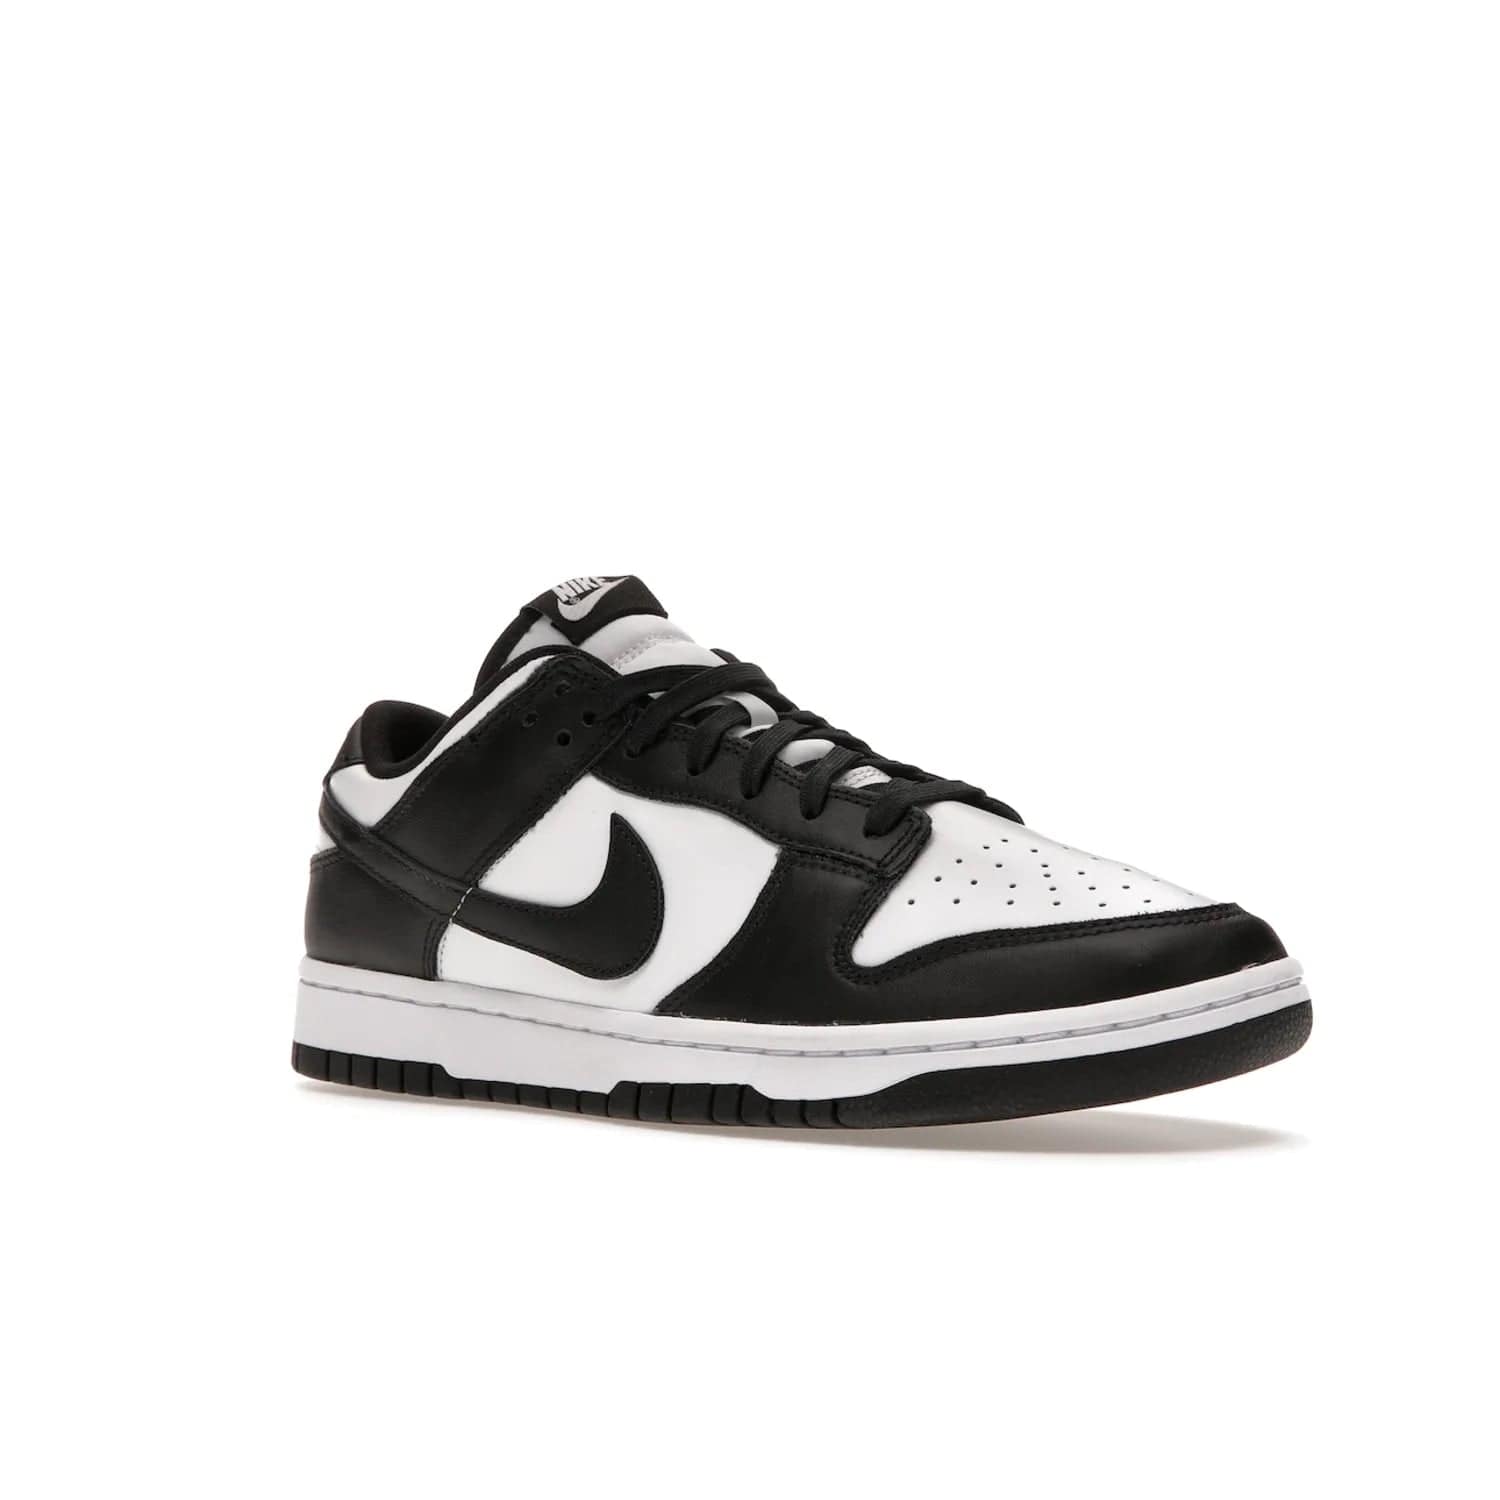 Nike Dunk Low Retro White Black Panda (2021) - Image 5 - Only at www.BallersClubKickz.com - Shop the Nike Dunk Low Retro White Black for classic styling featuring white leather with black leather overlays and classic Nike branding. Released in 2021, this timeless design offers a white midsole and black outsole for a stylish look. Shop all the Nike Dunks & rock this classic look.